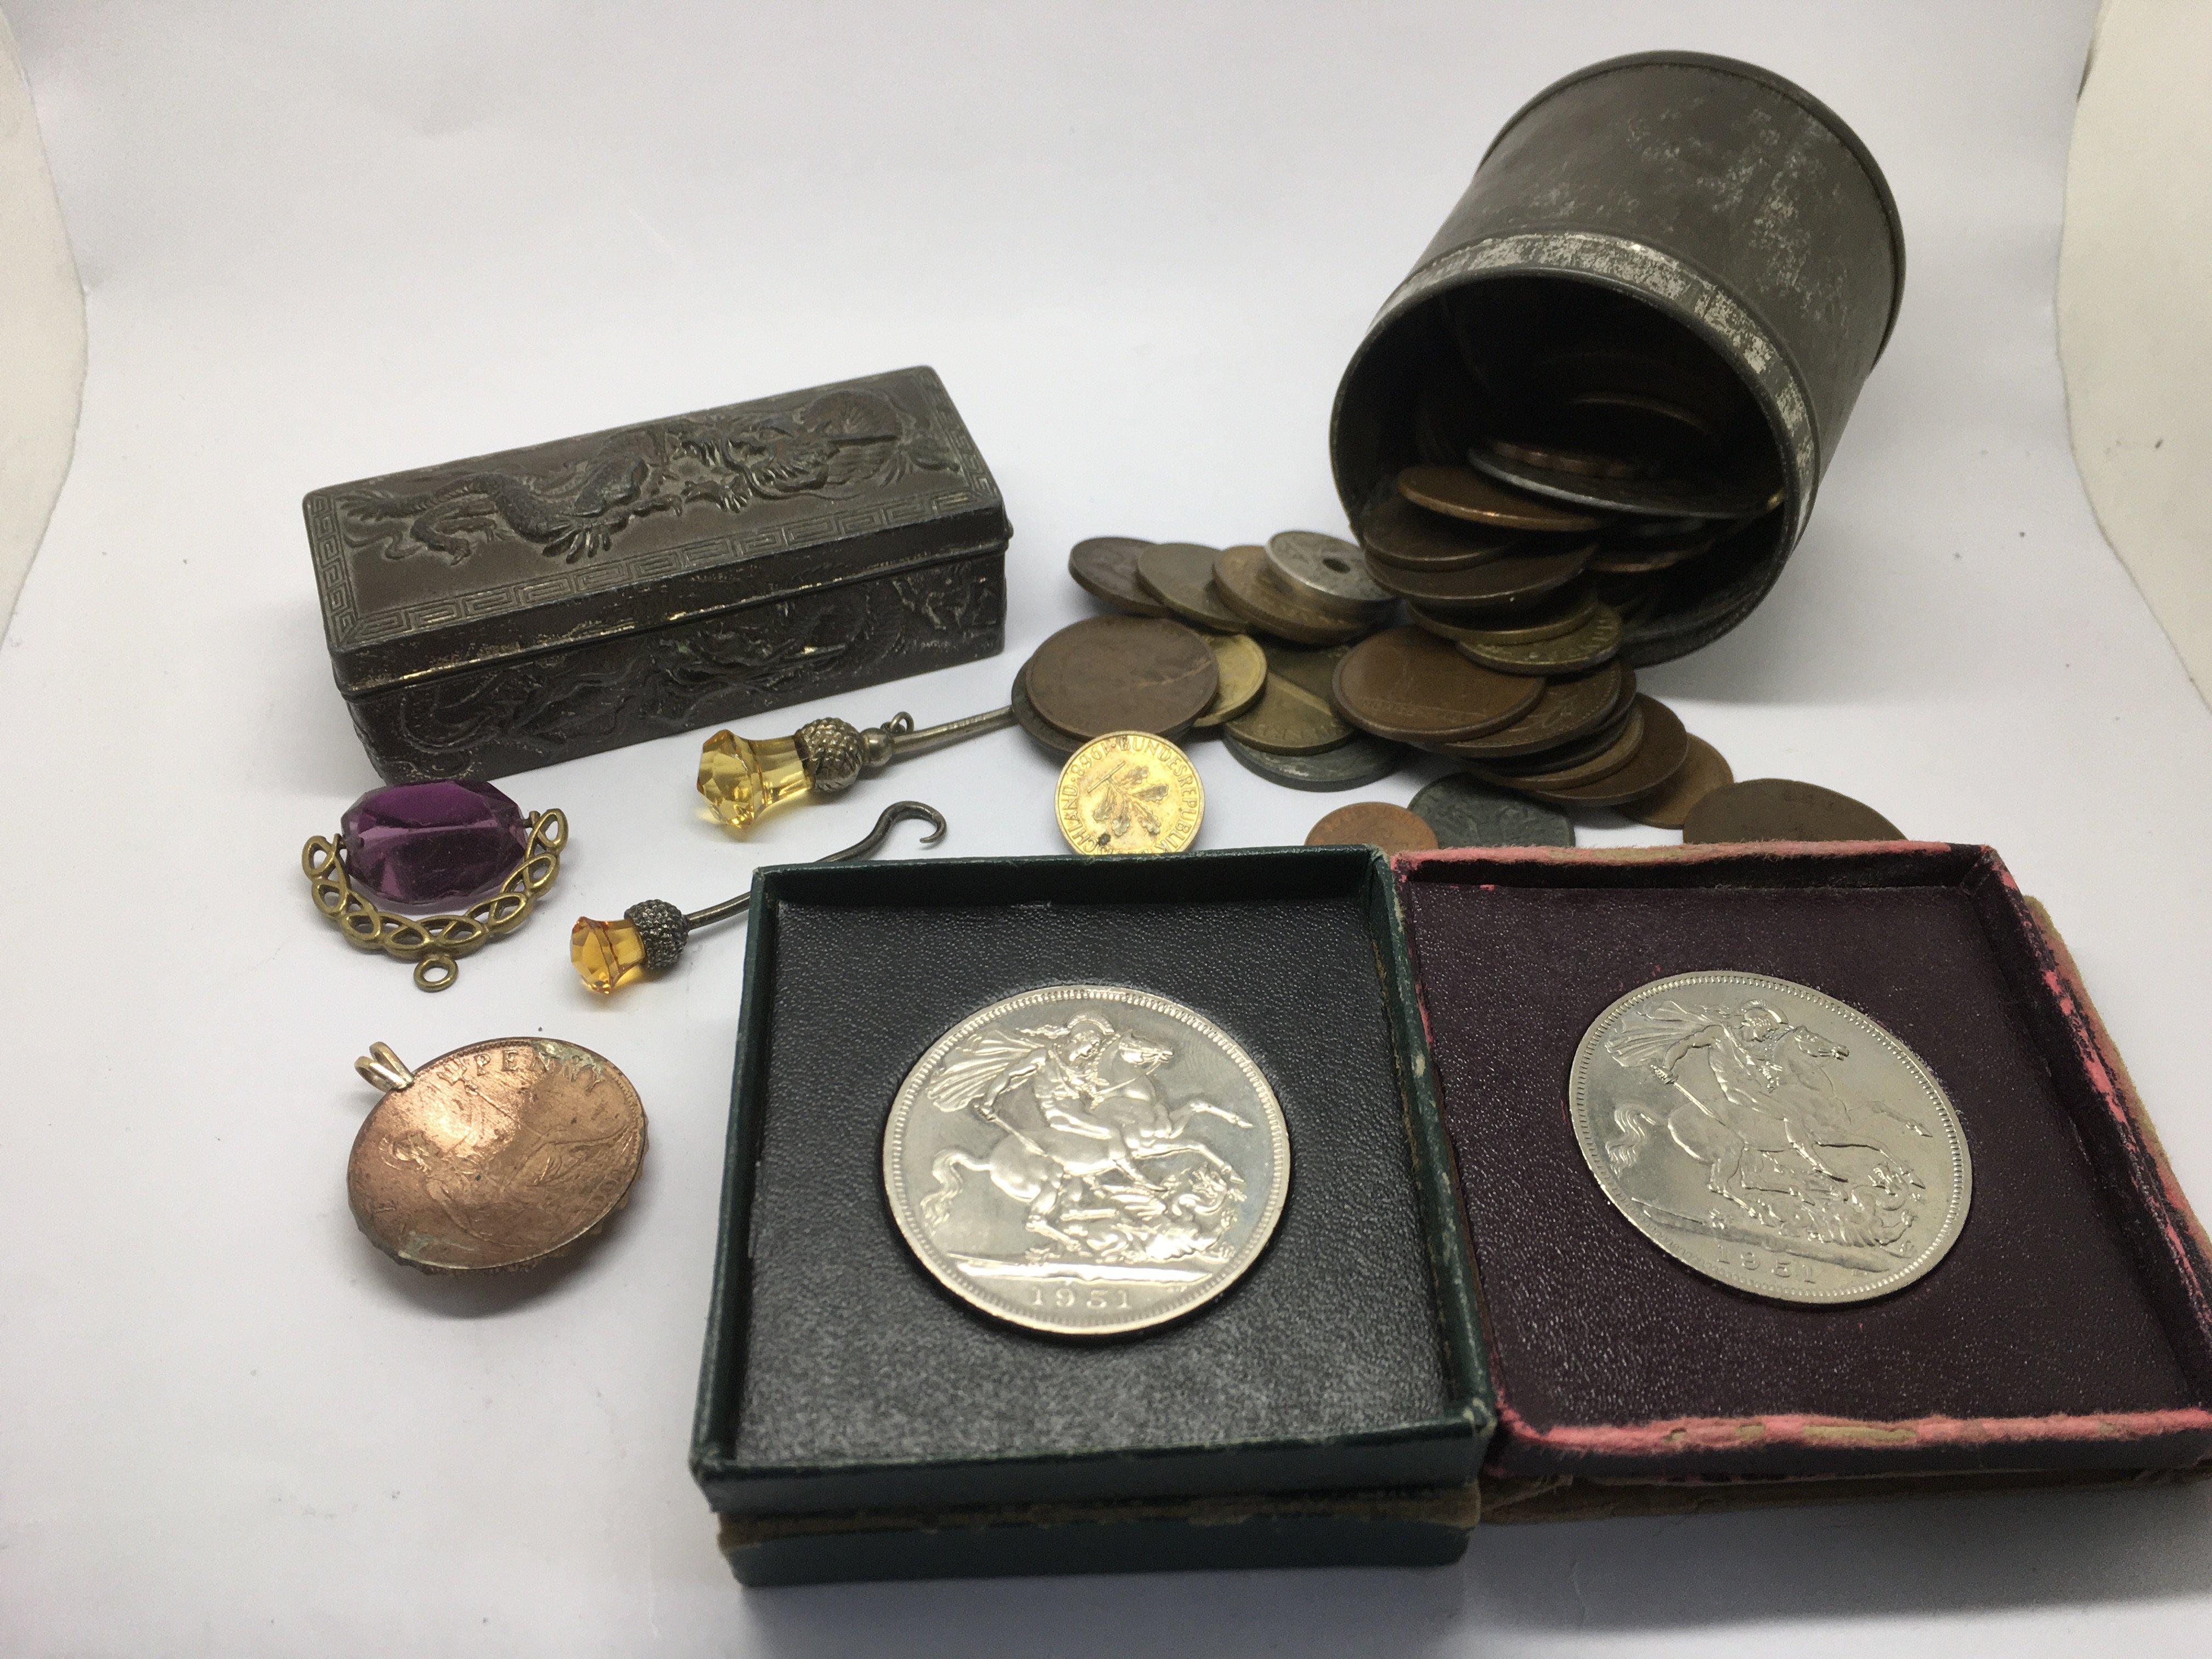 A small Chinese box, various coins, pens and other